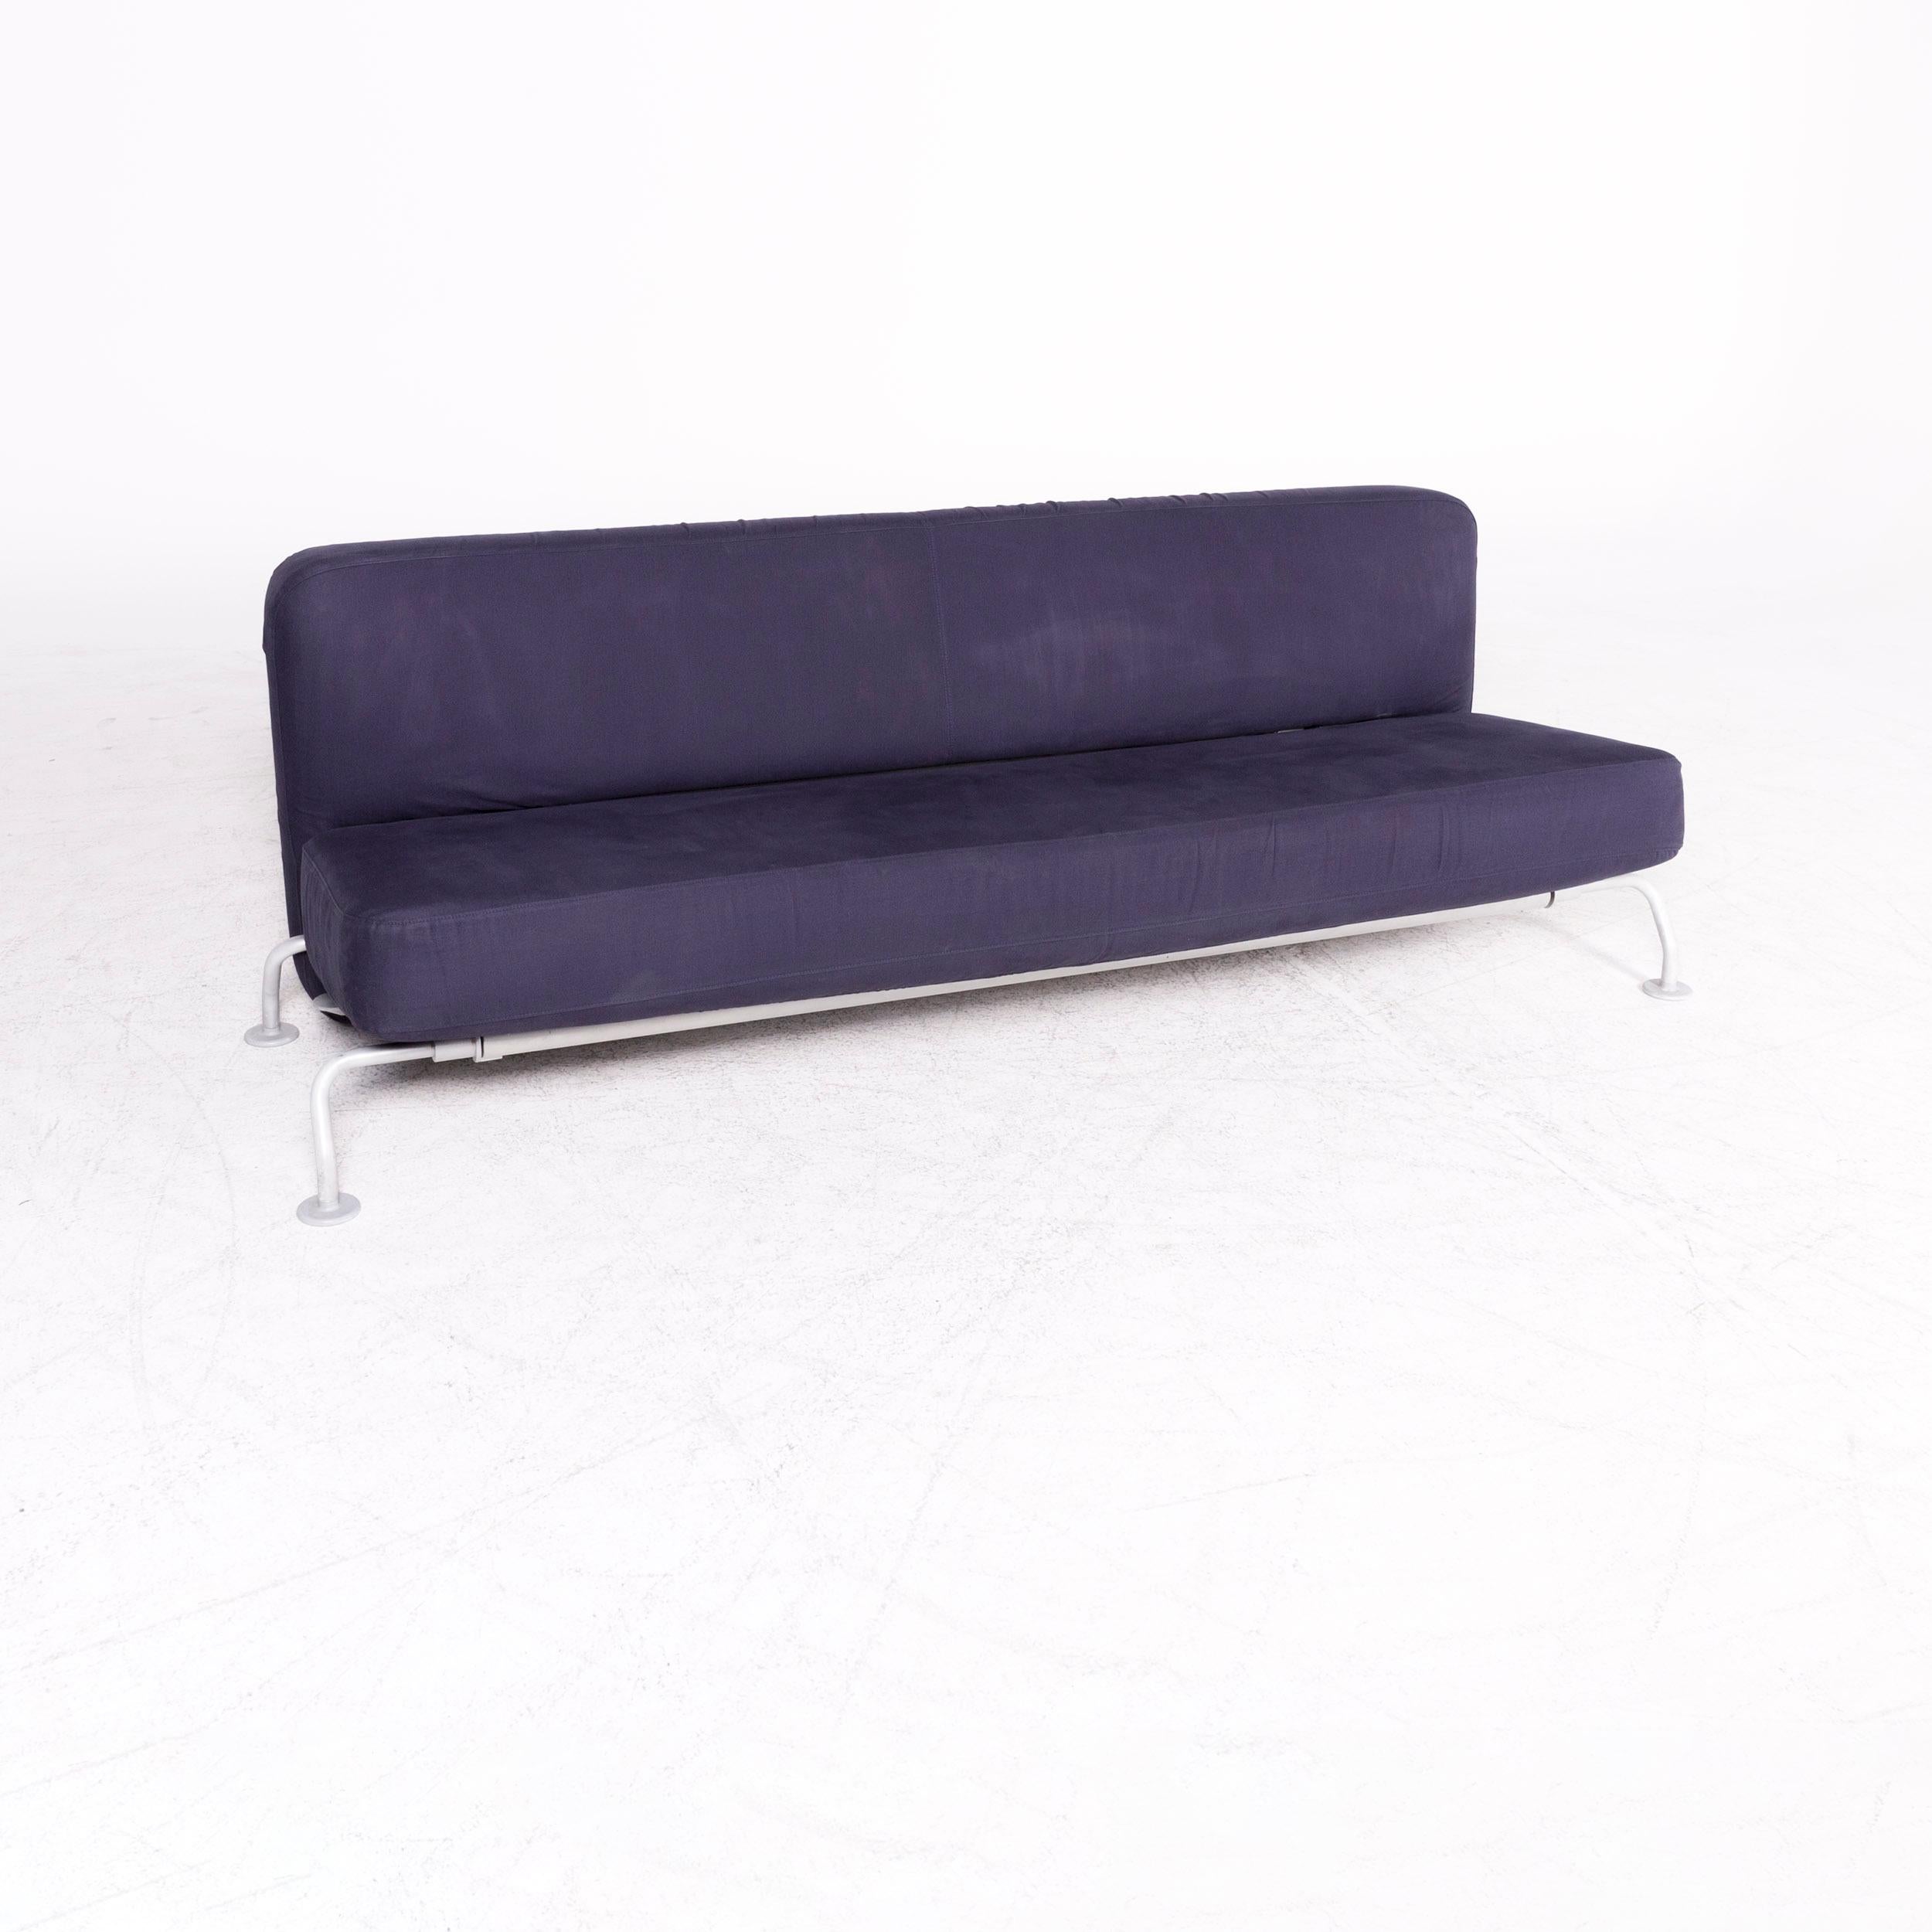 We bring to you a B & B Italia designer fabric sofa purple three-seat function couch sofa bed.
 

Product measures in centimeters:

Depth: 84
Width: 222
Height: 73
Seat-height: 43
Rest-height:
Seat-depth: 53
Seat-width: 200
Back-height: